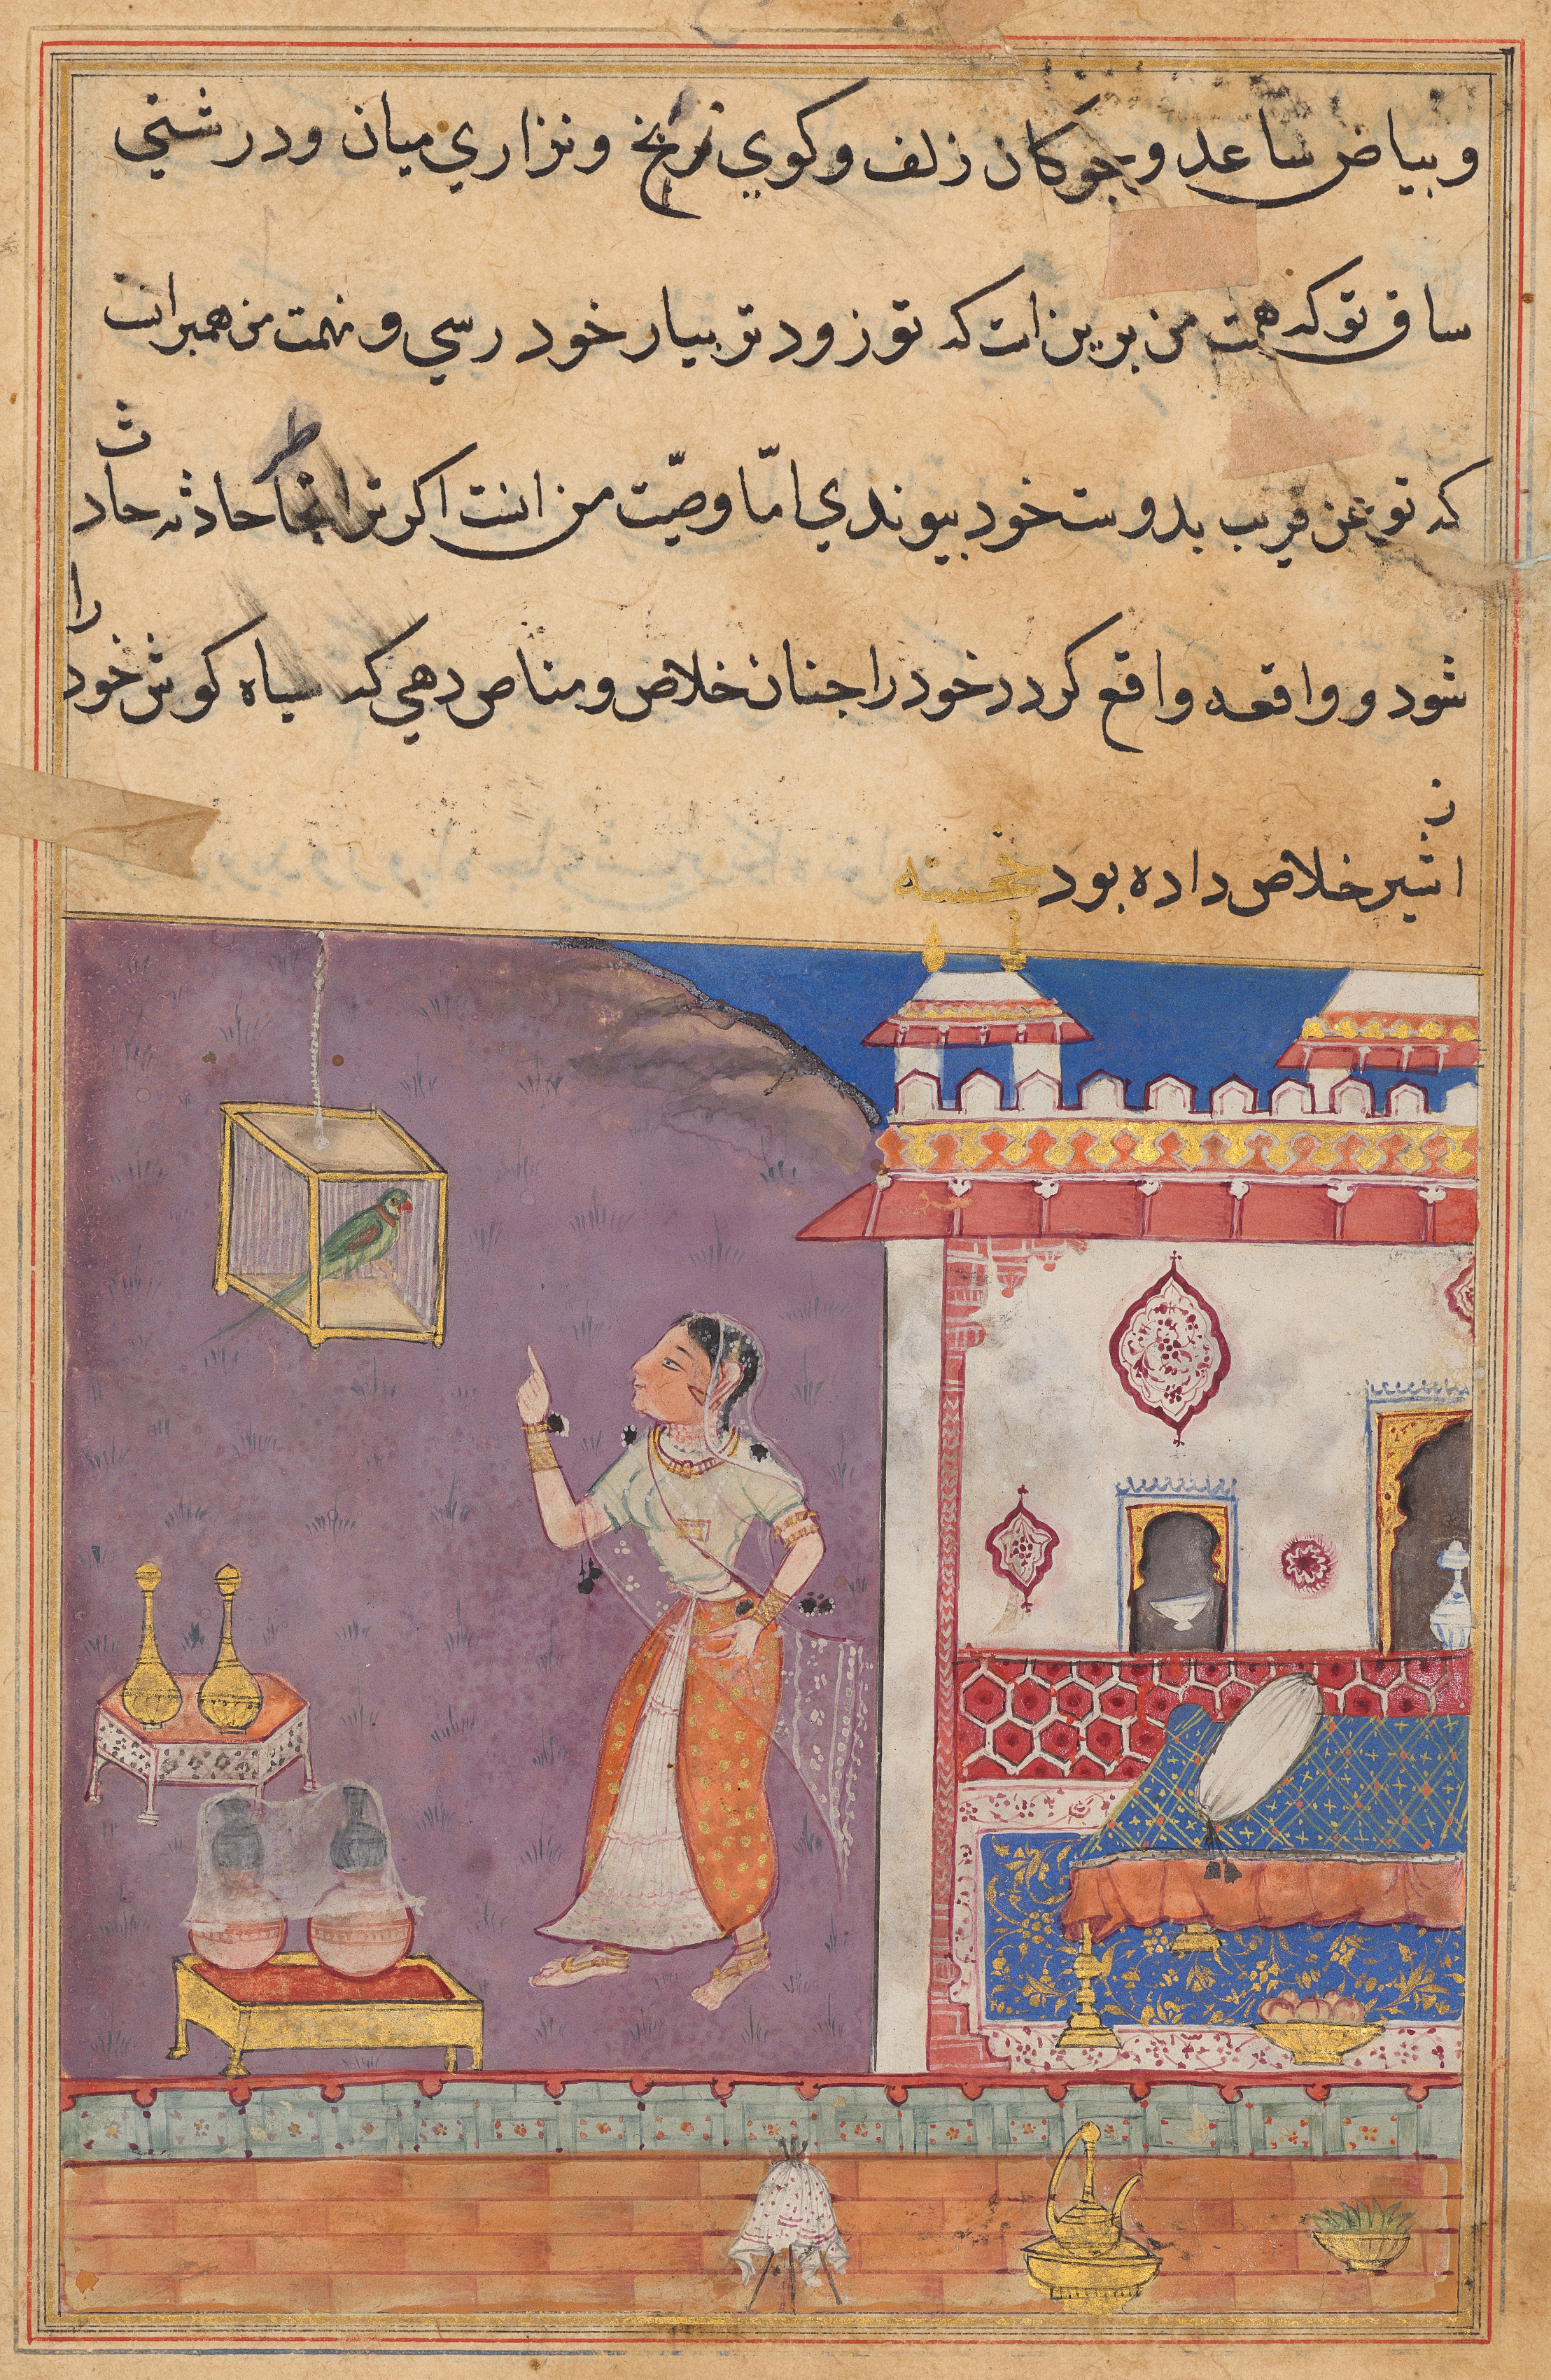 The Parrot Addresses Khujasta at the Beginning of the Twenty-ninth Night, from a Tuti-nama (Tales of a Parrot)